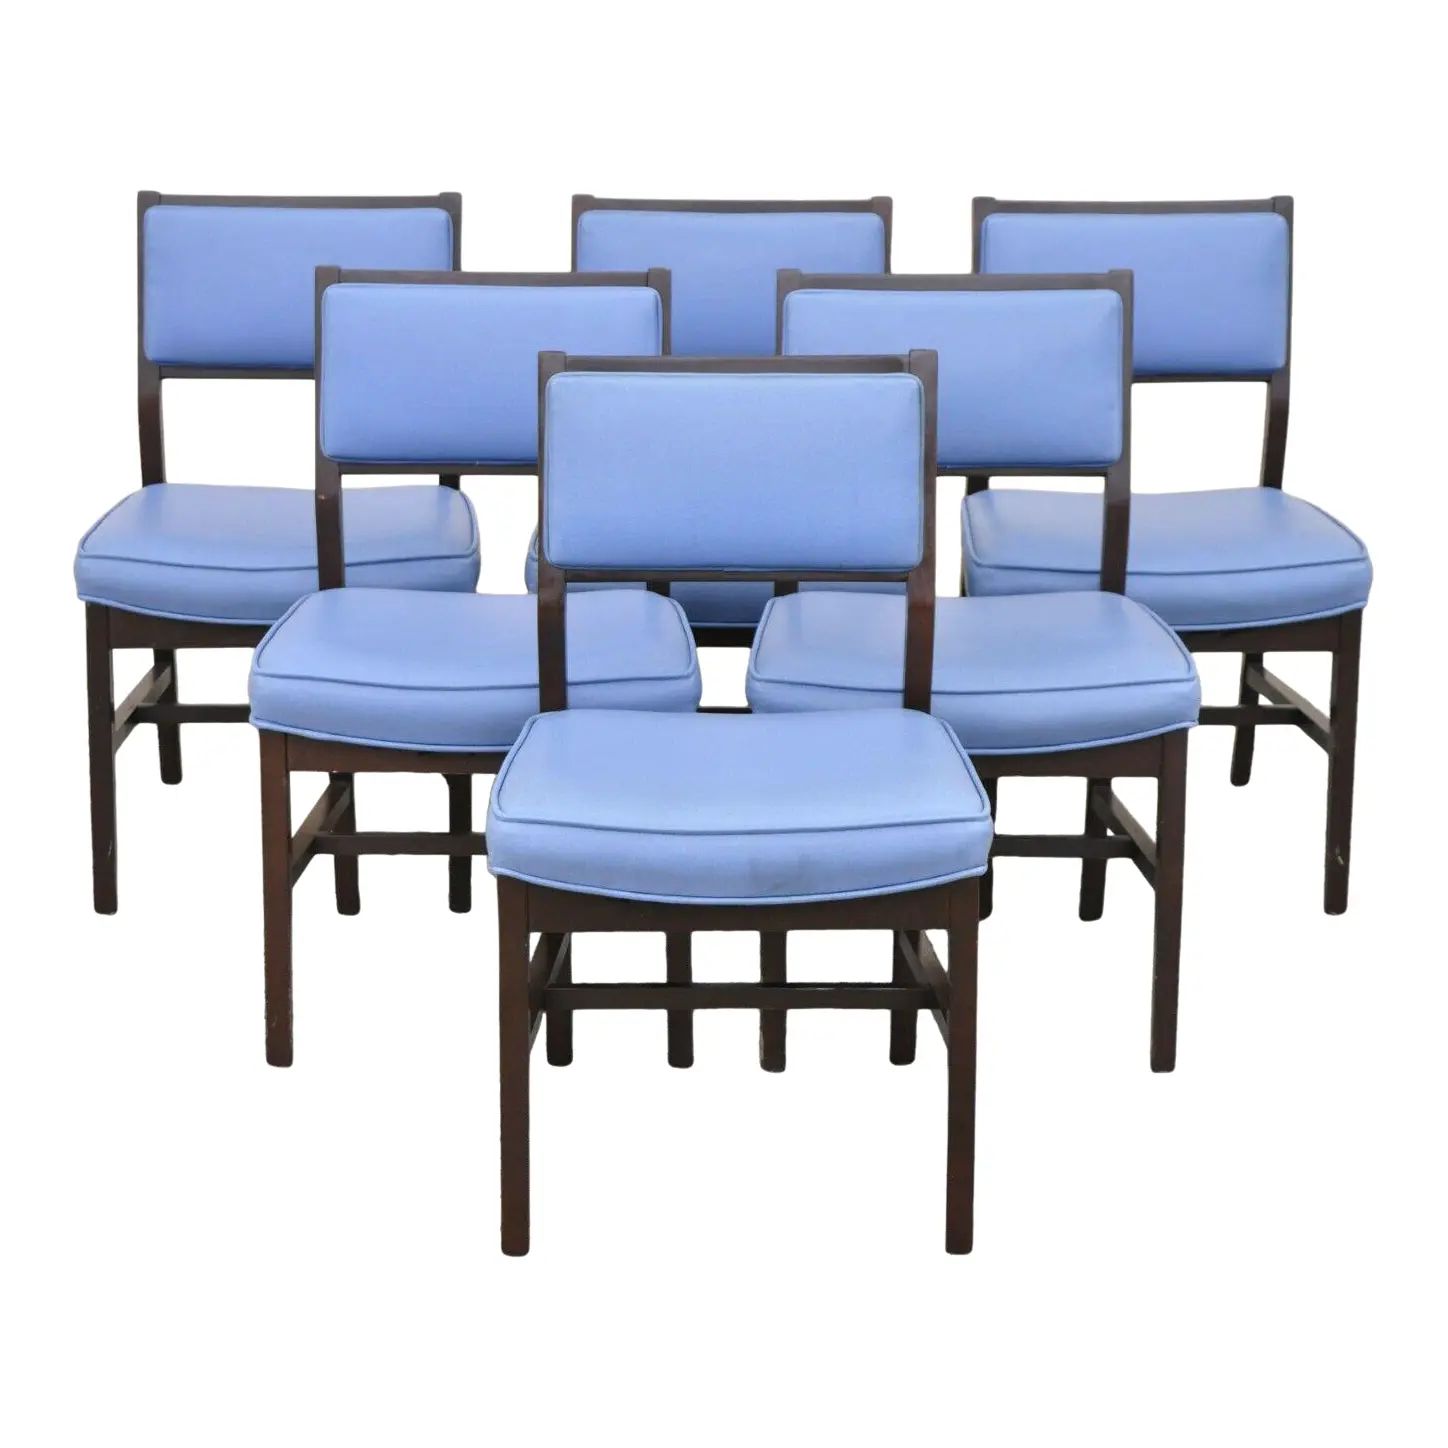 Vintage Mid Century Modern Jens Risom Style Blue Sculpted Dining Chair -Set of 6 | Chairish